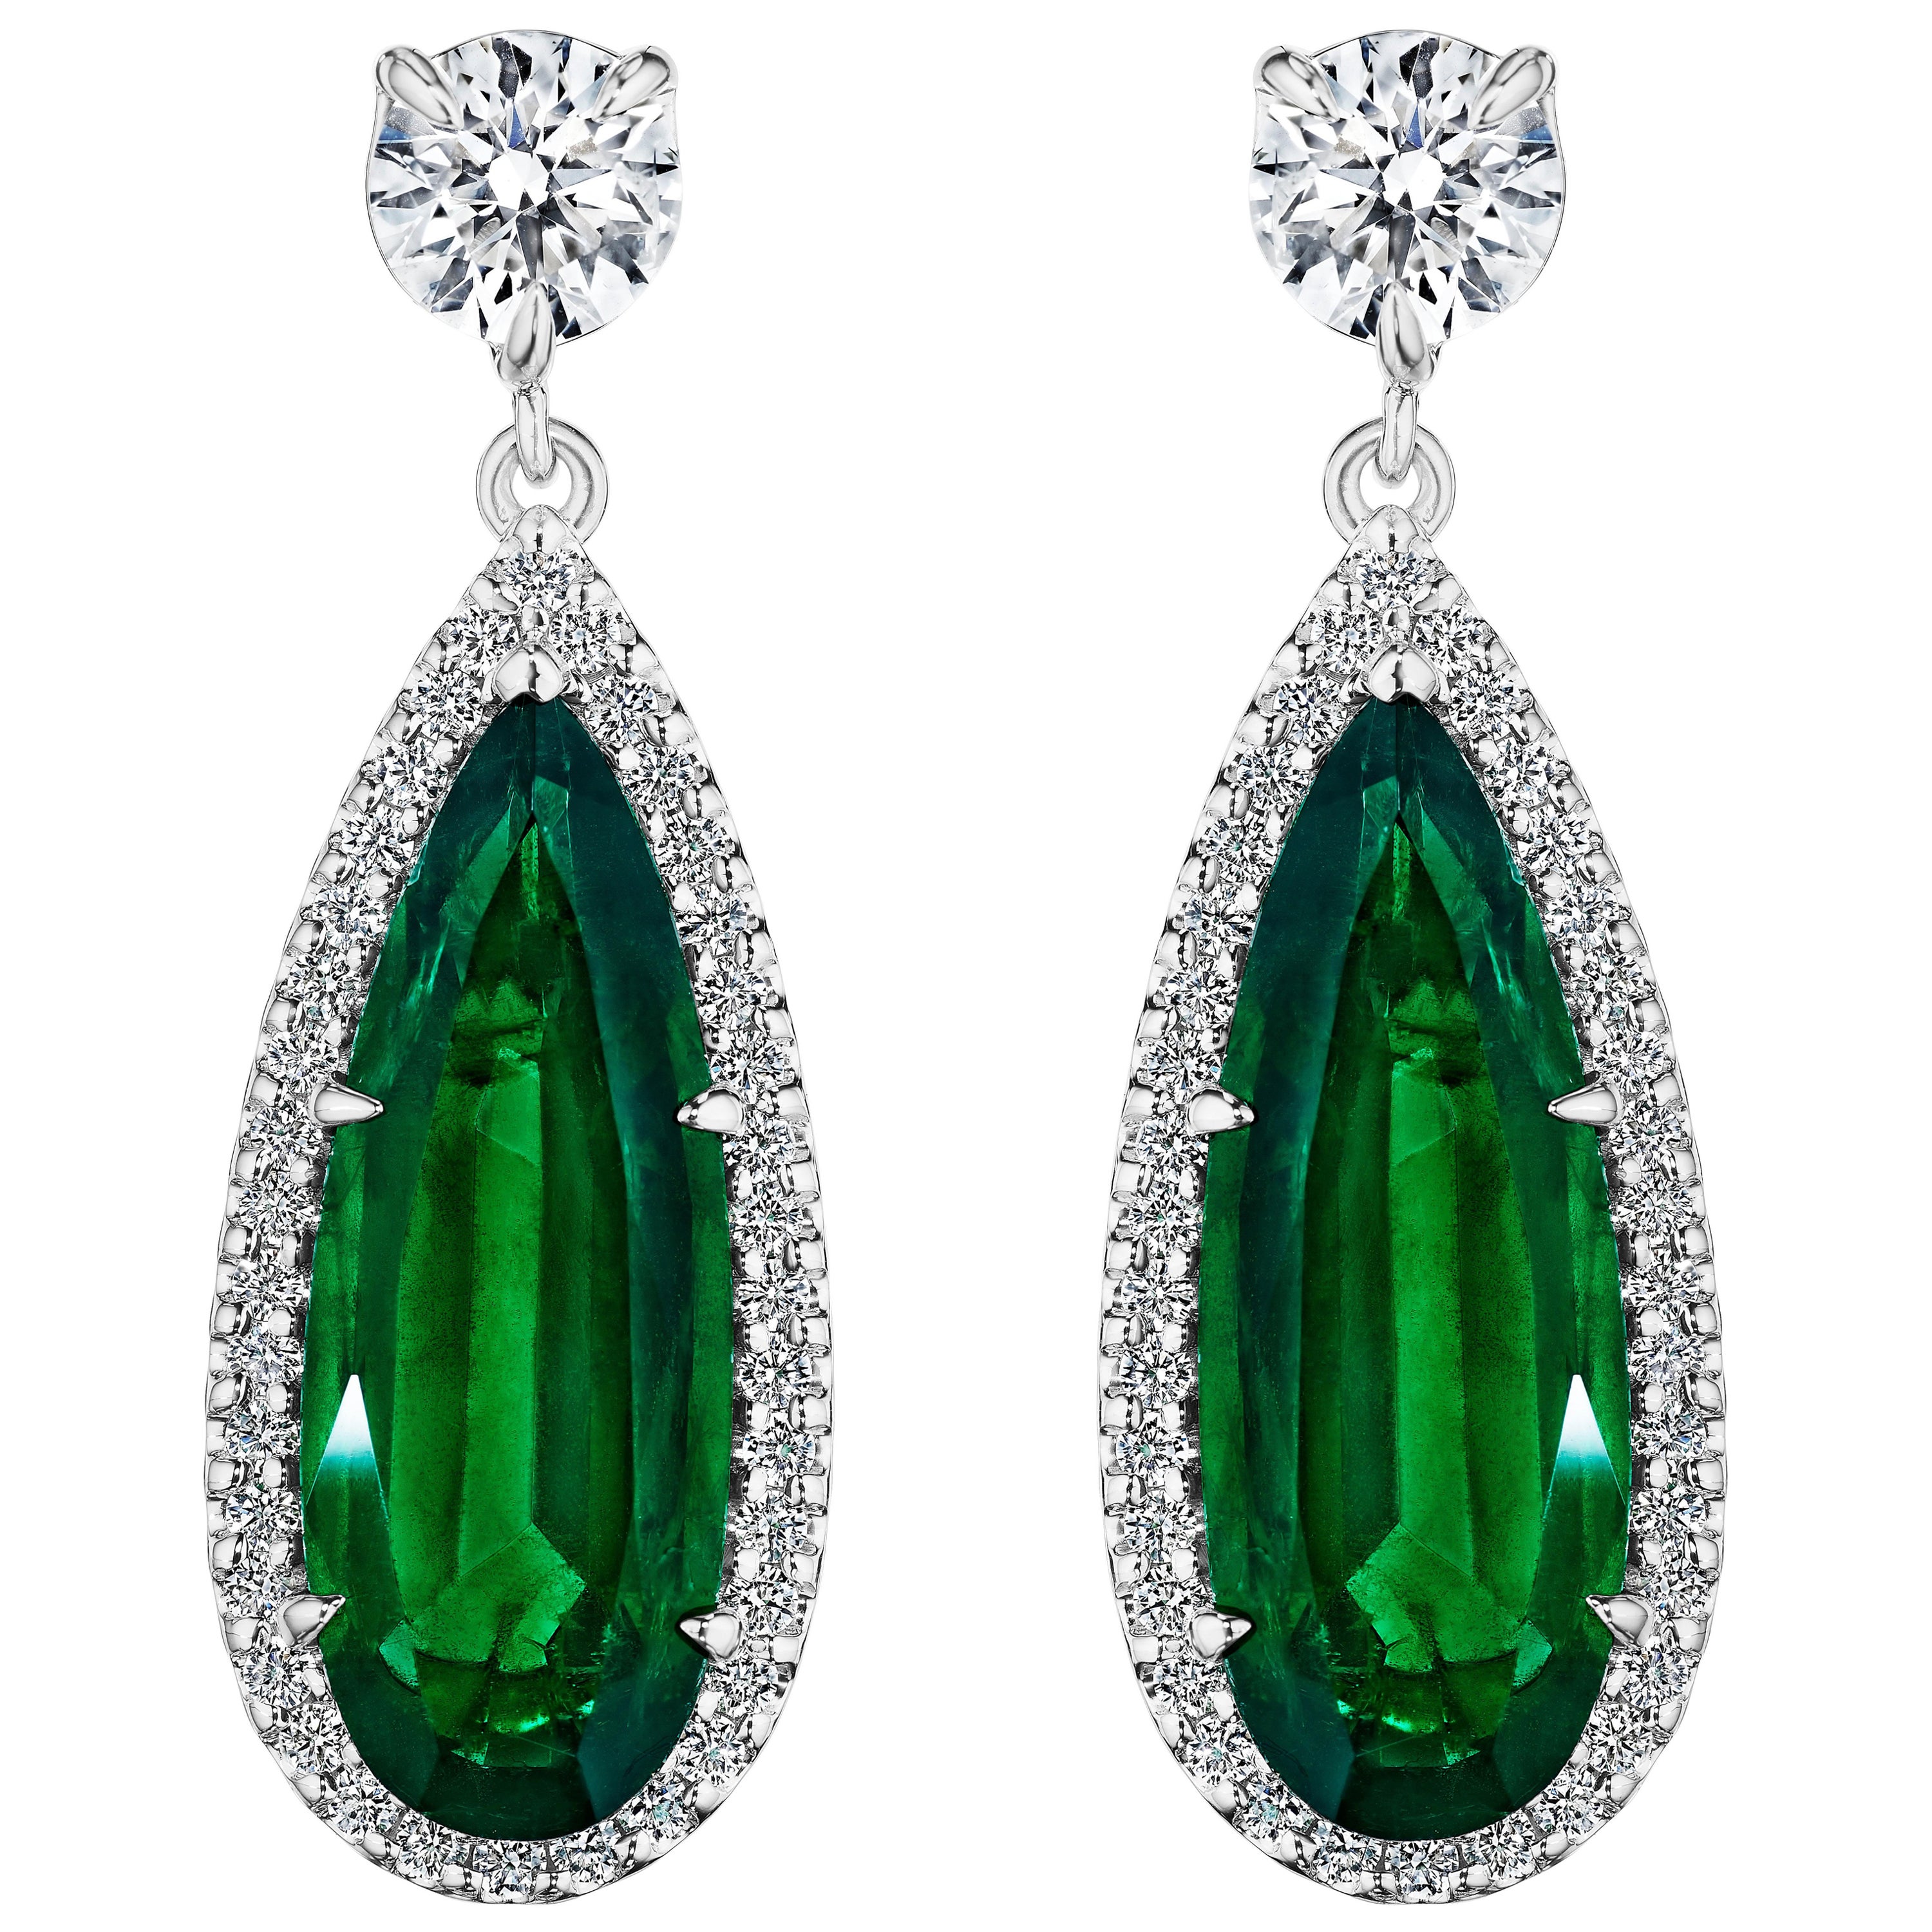 12.87ct Pear Shape Emerald & Round Diamond Earrings in 18KT White Gold For Sale